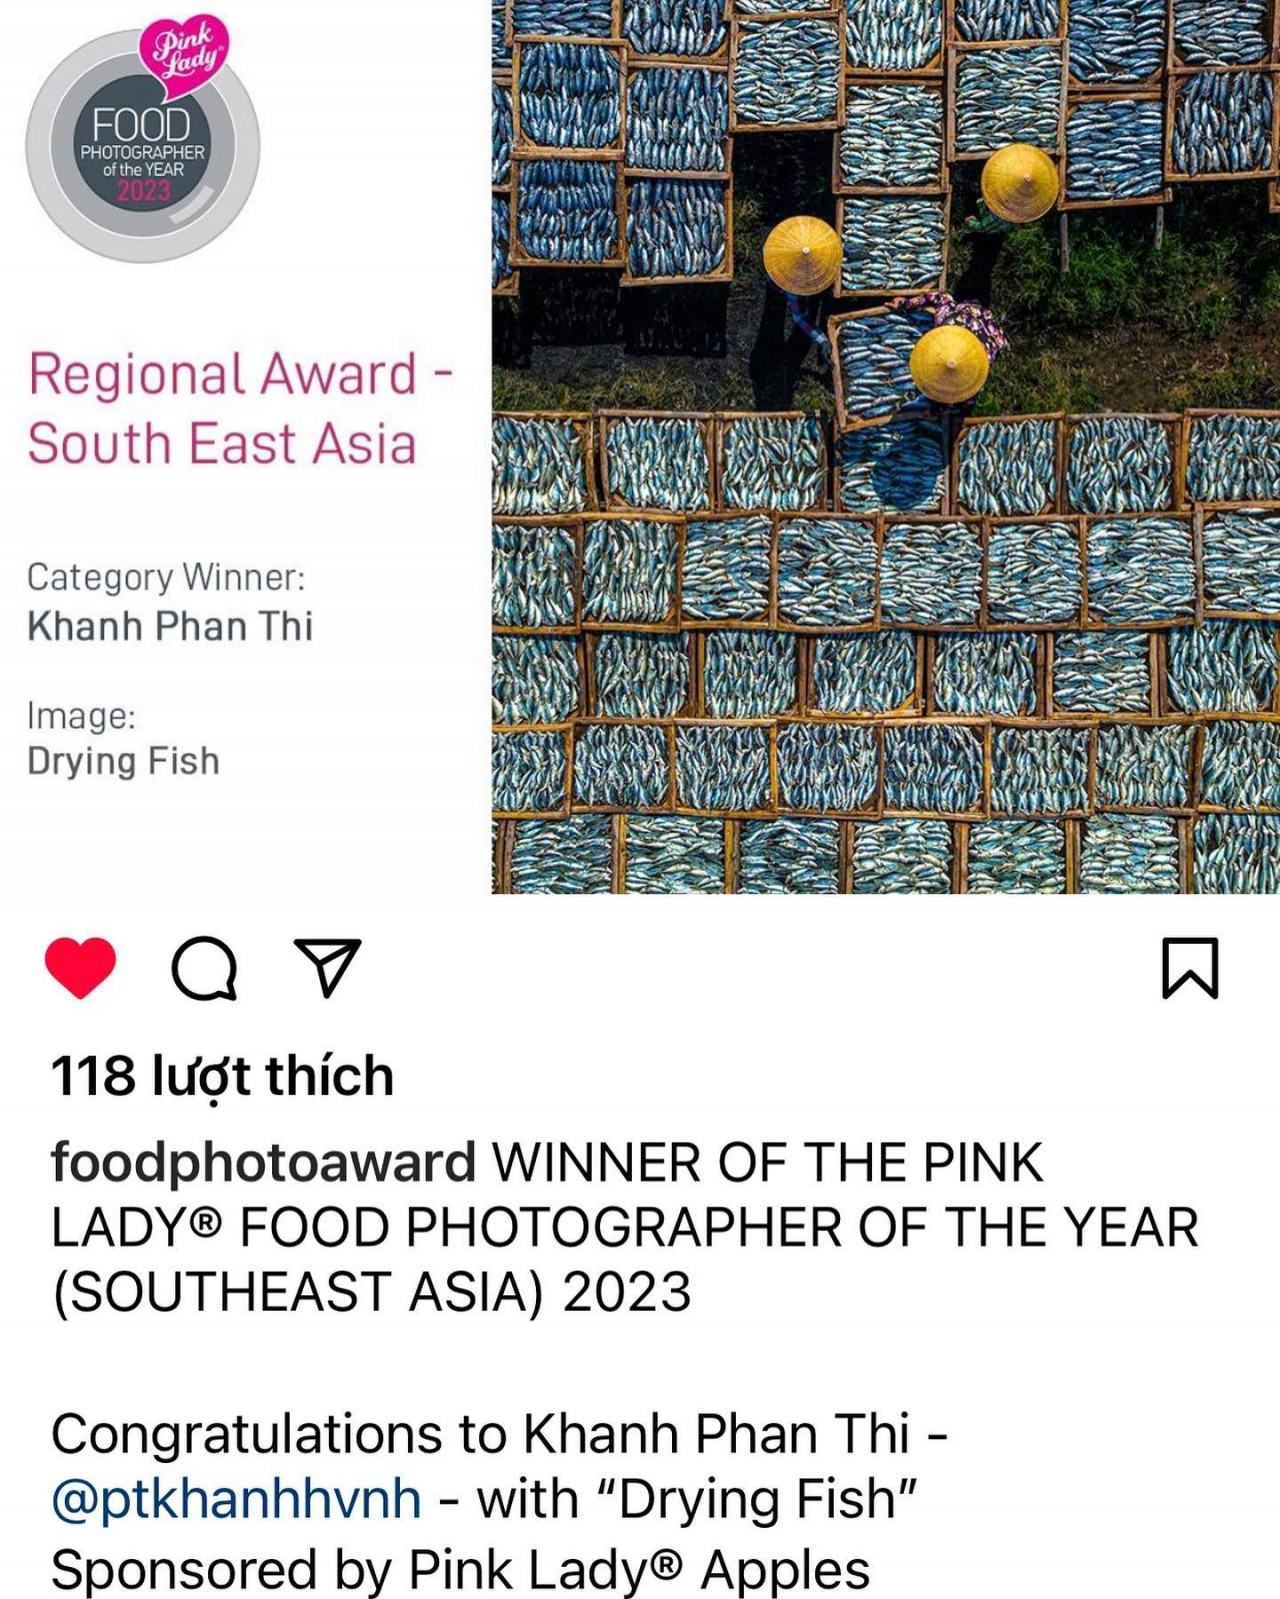 ‘Drying Fish’, by Khanh Phan Thi, Vietnam, won the Pink Lady® Food Photographer of the Year (South East Asia) category.